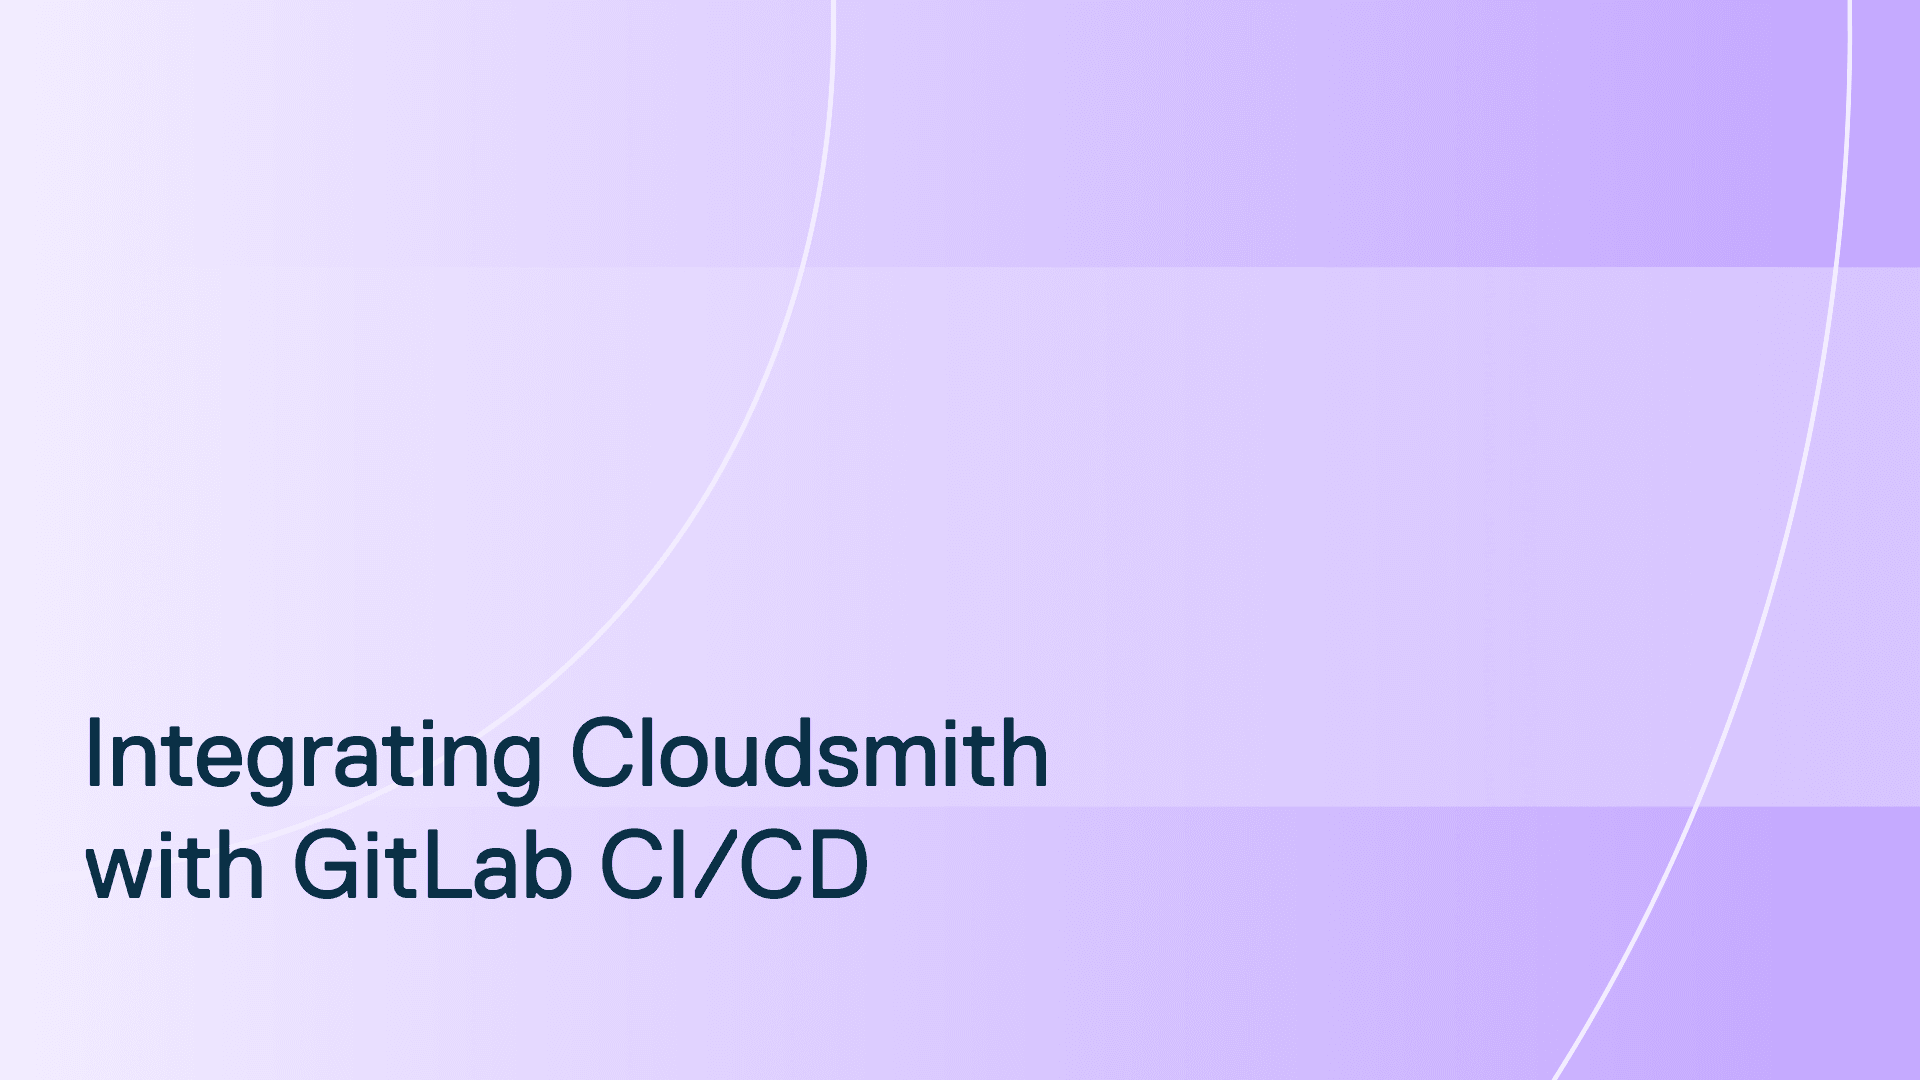 Using GitLab CI/CD to push packages to Cloudsmith